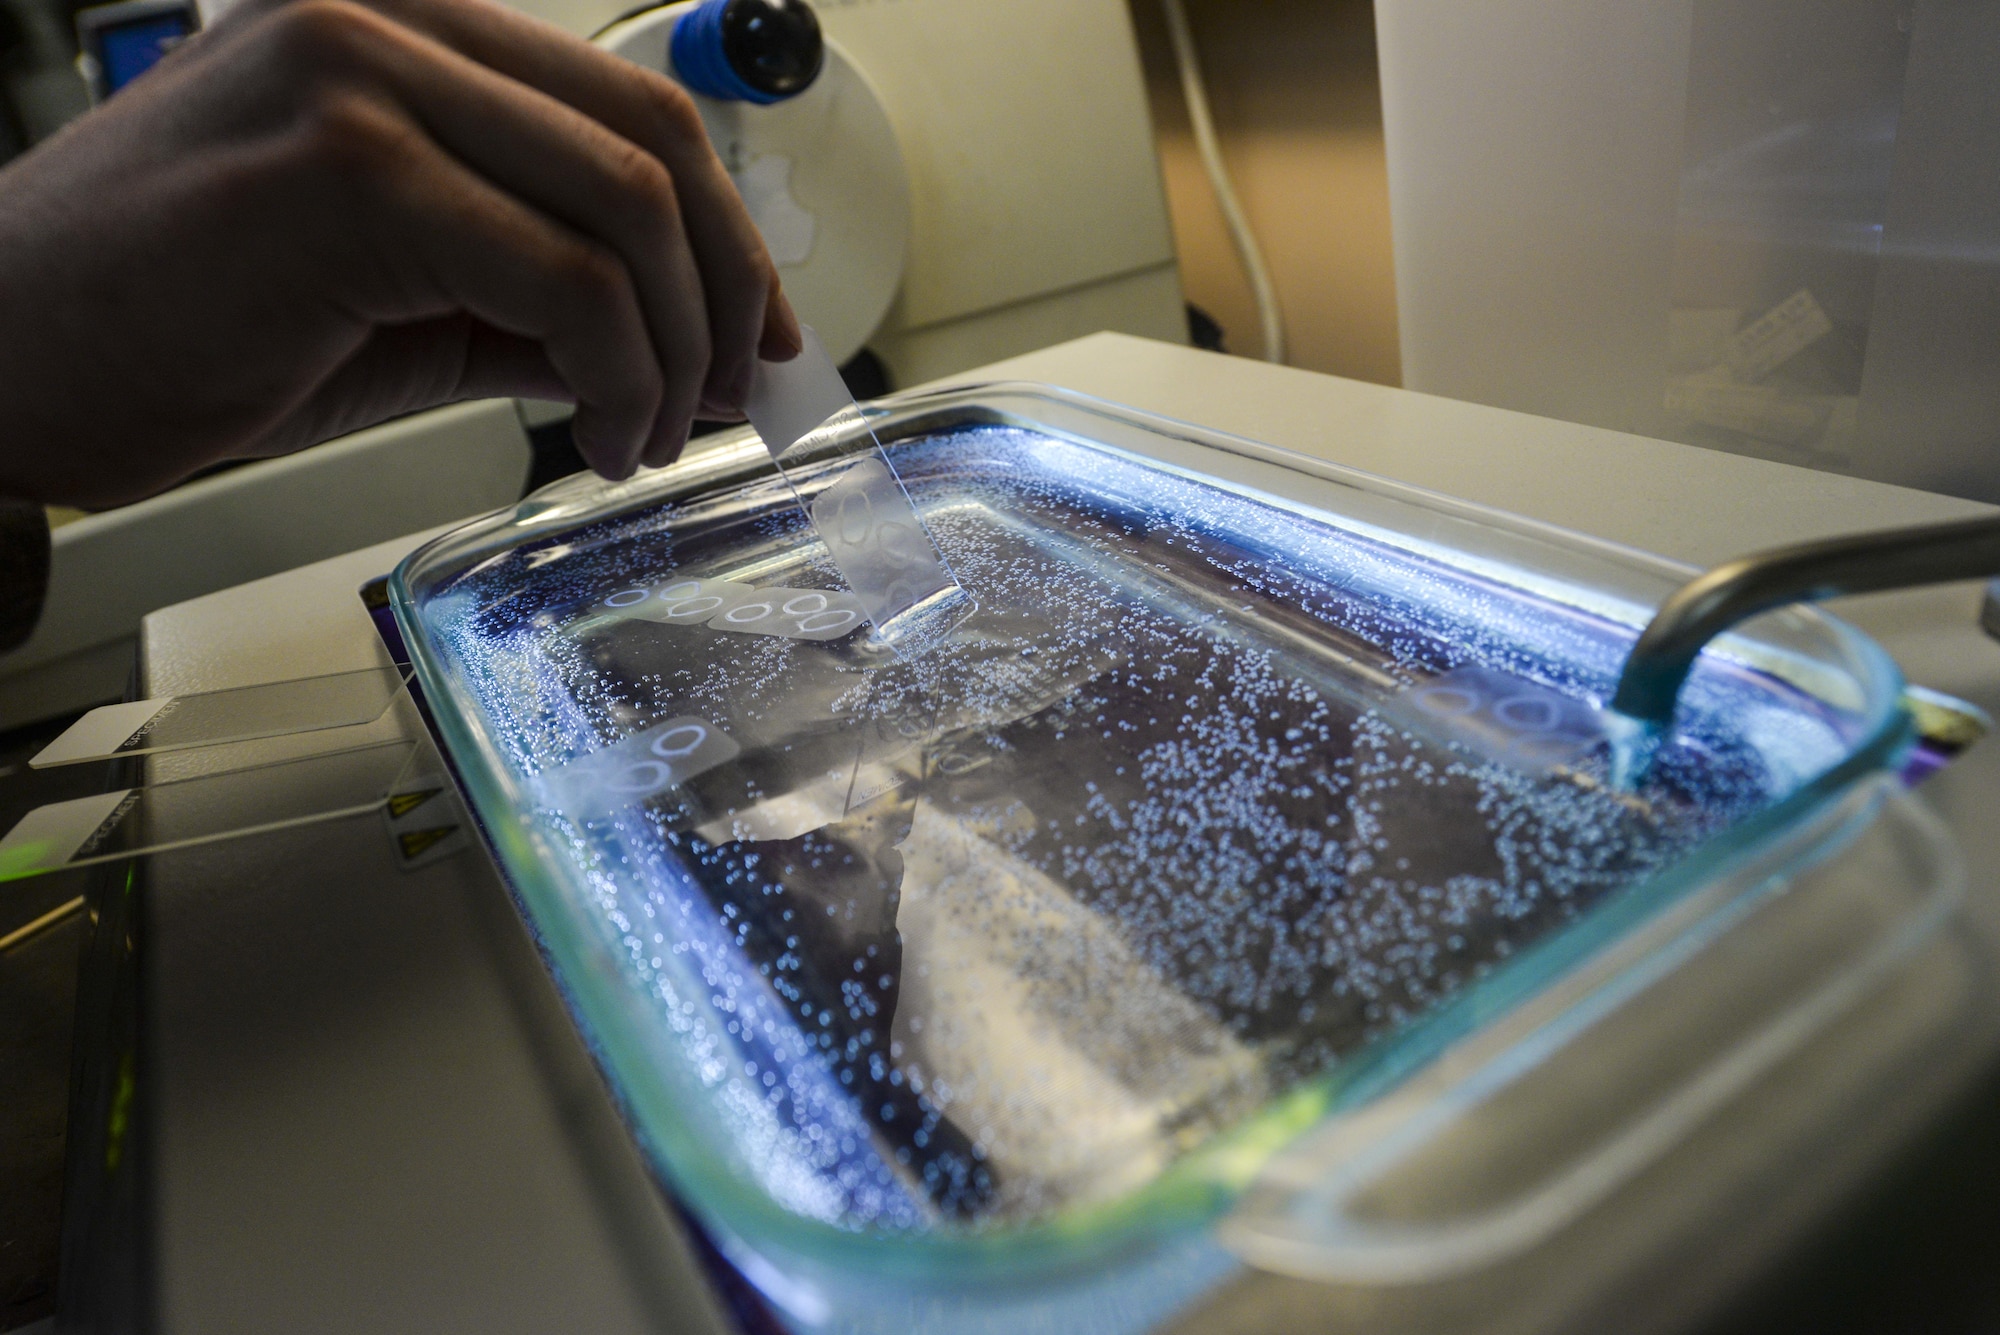 An Airman prepares a slide in the in the hematology laboratory section of the Mike O’Callaghan Federal Medical Center at Nellis Air Force Base, Nev., April 24, 2017. Even though each section in the Clinical Laboratory is specialized in the tests they perform, all of the lab sections work together to provide the best patient care. (U.S. Air Force photo by Airman 1st Class Nathan Byrnes/Released)